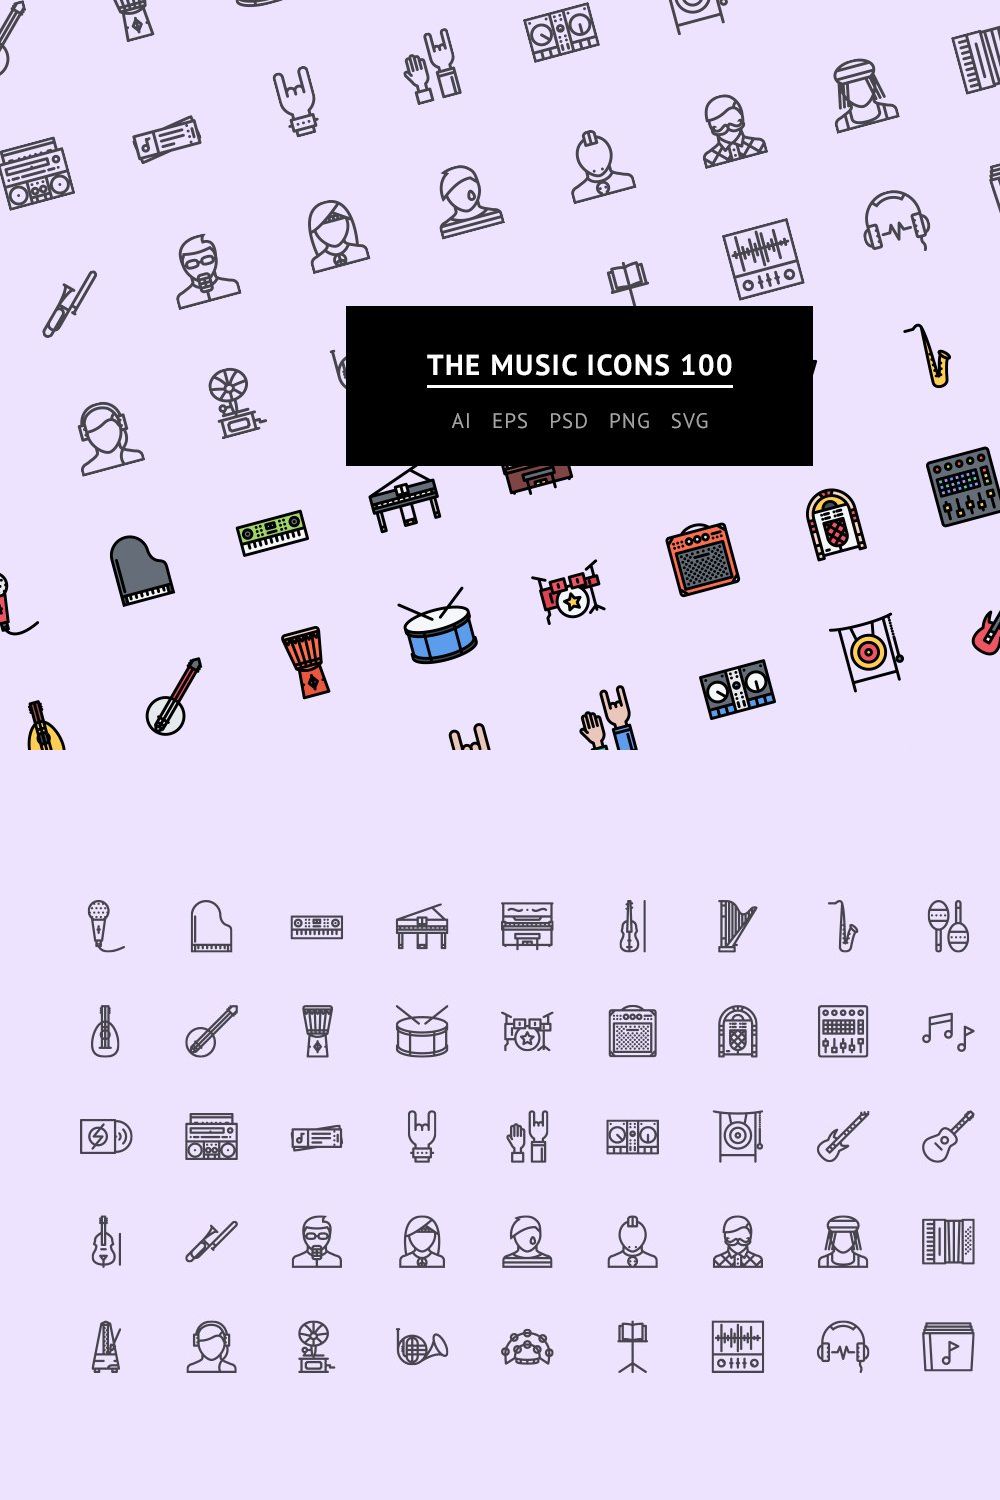 The Music Icons 100 pinterest preview image.